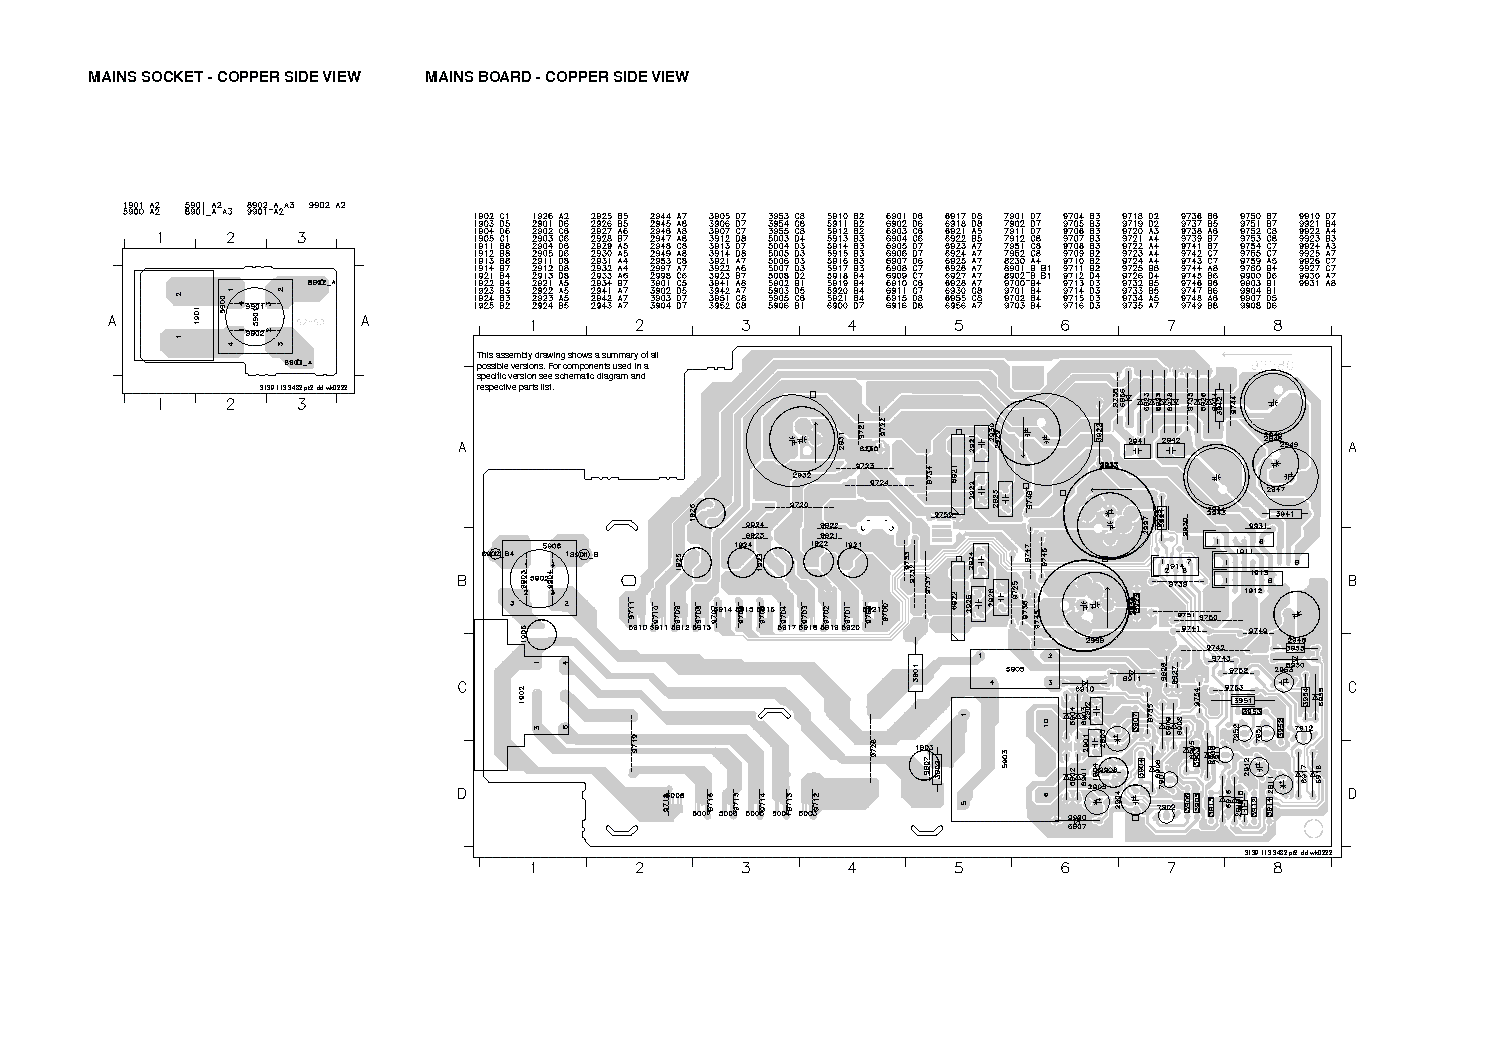 PHILIPS FW-C780 SCH service manual (2nd page)